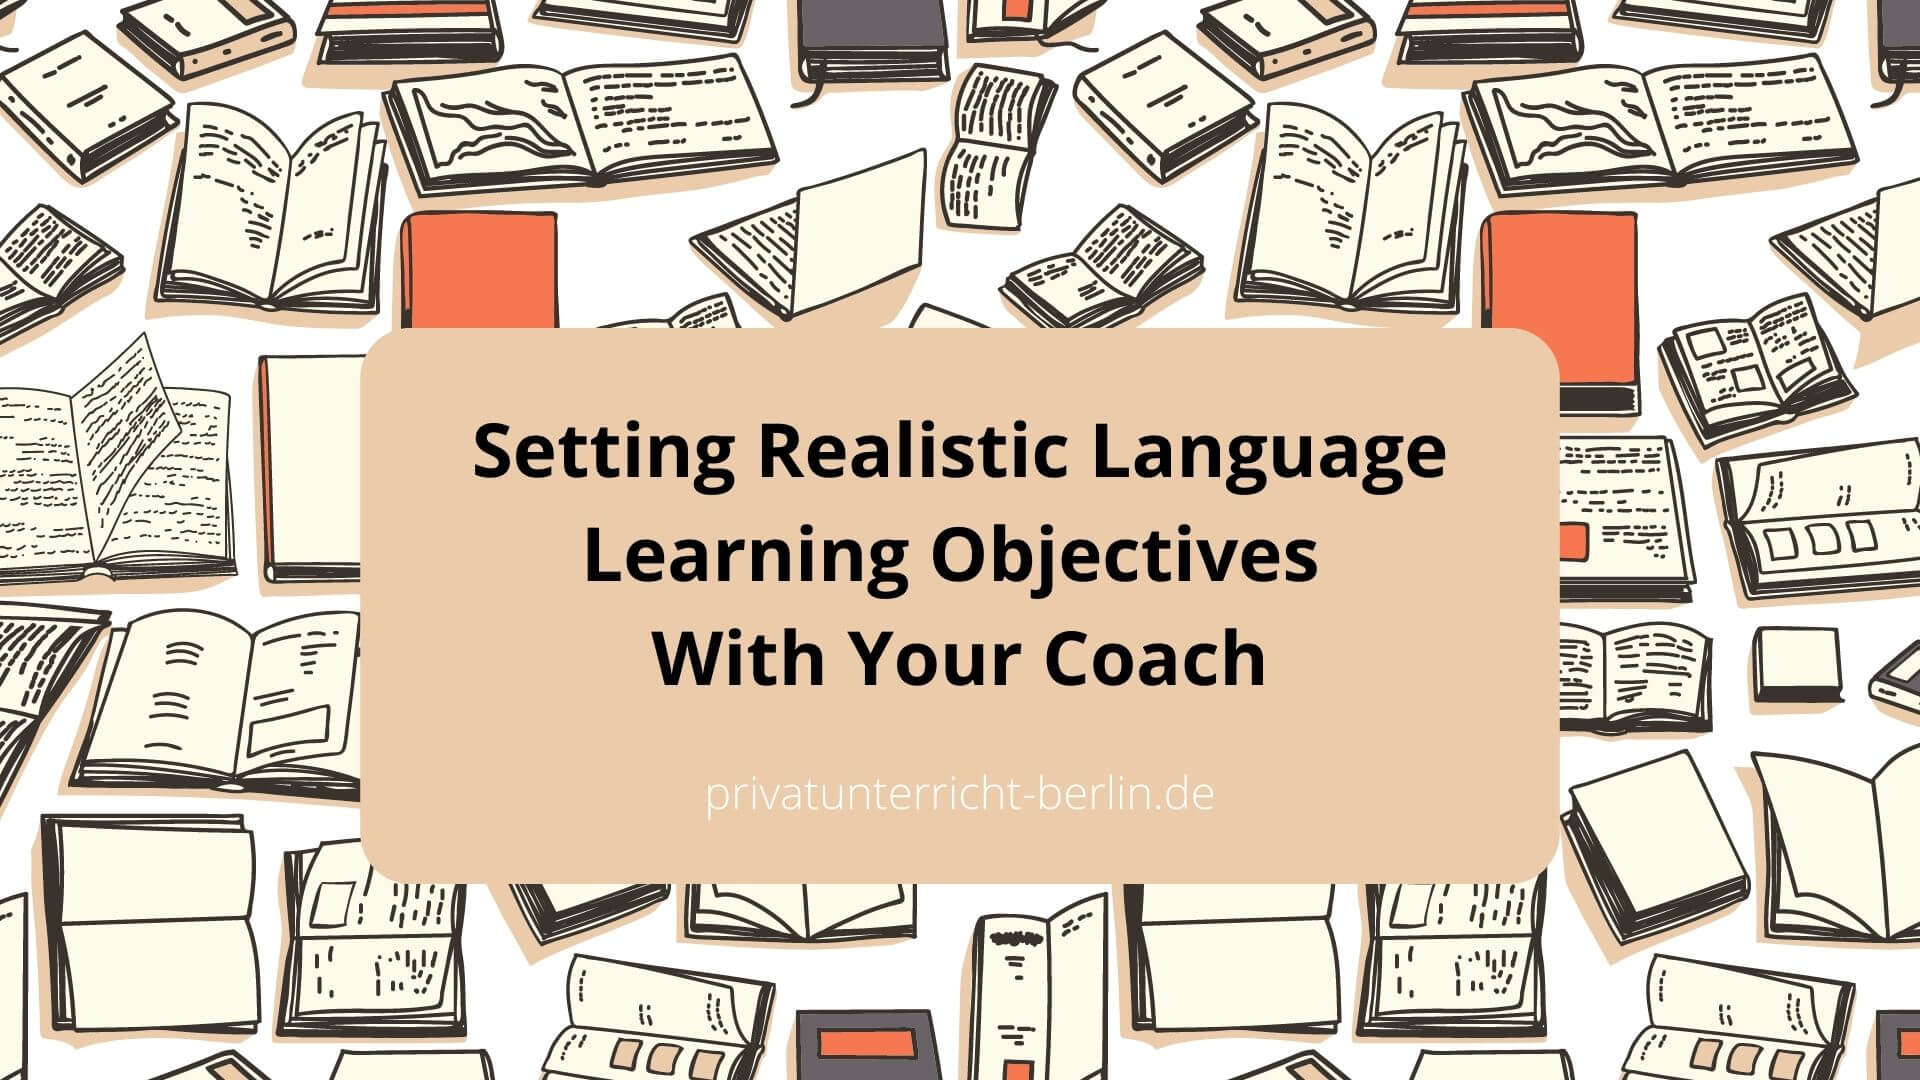 Setting Realistic Language Learning Objectives With Your Coach